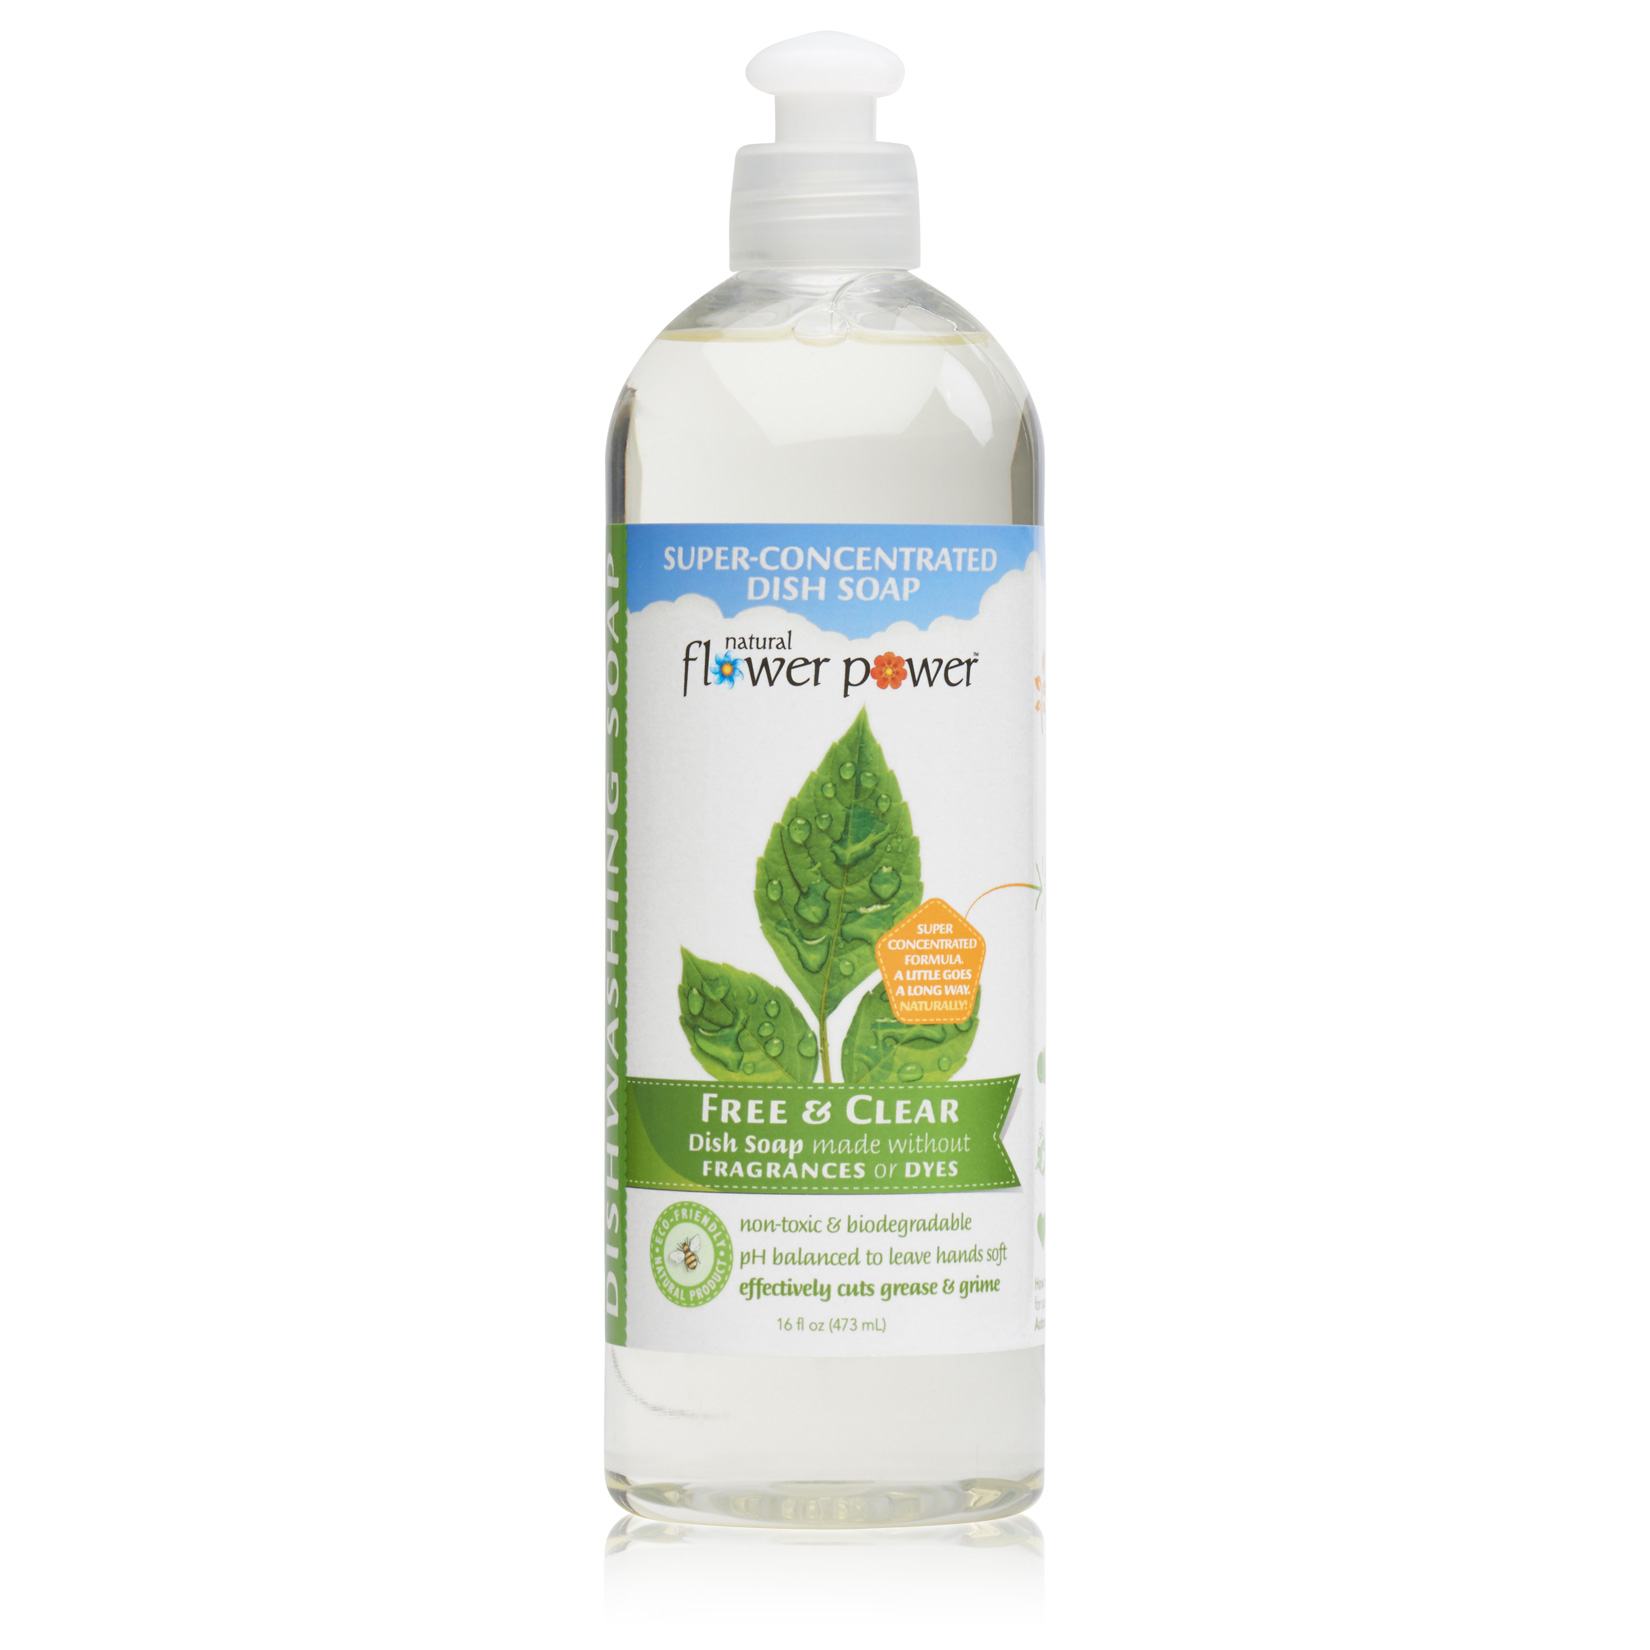 Free & Clear Dish Soap Powered By Plants And Made Without Dyes